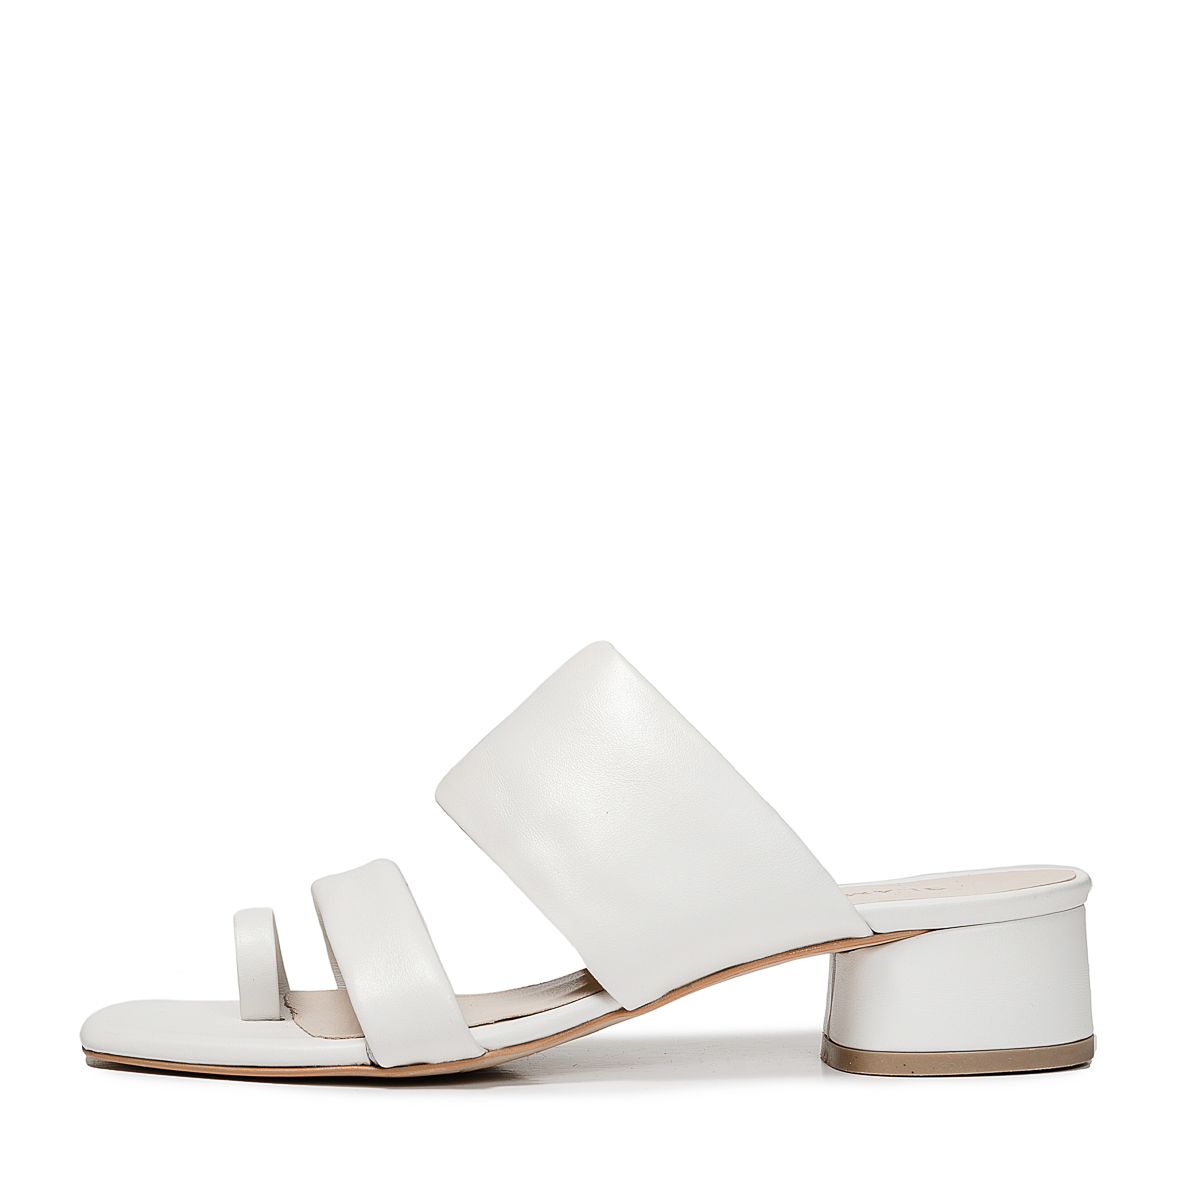 SNOW white leather mule - Glamazons